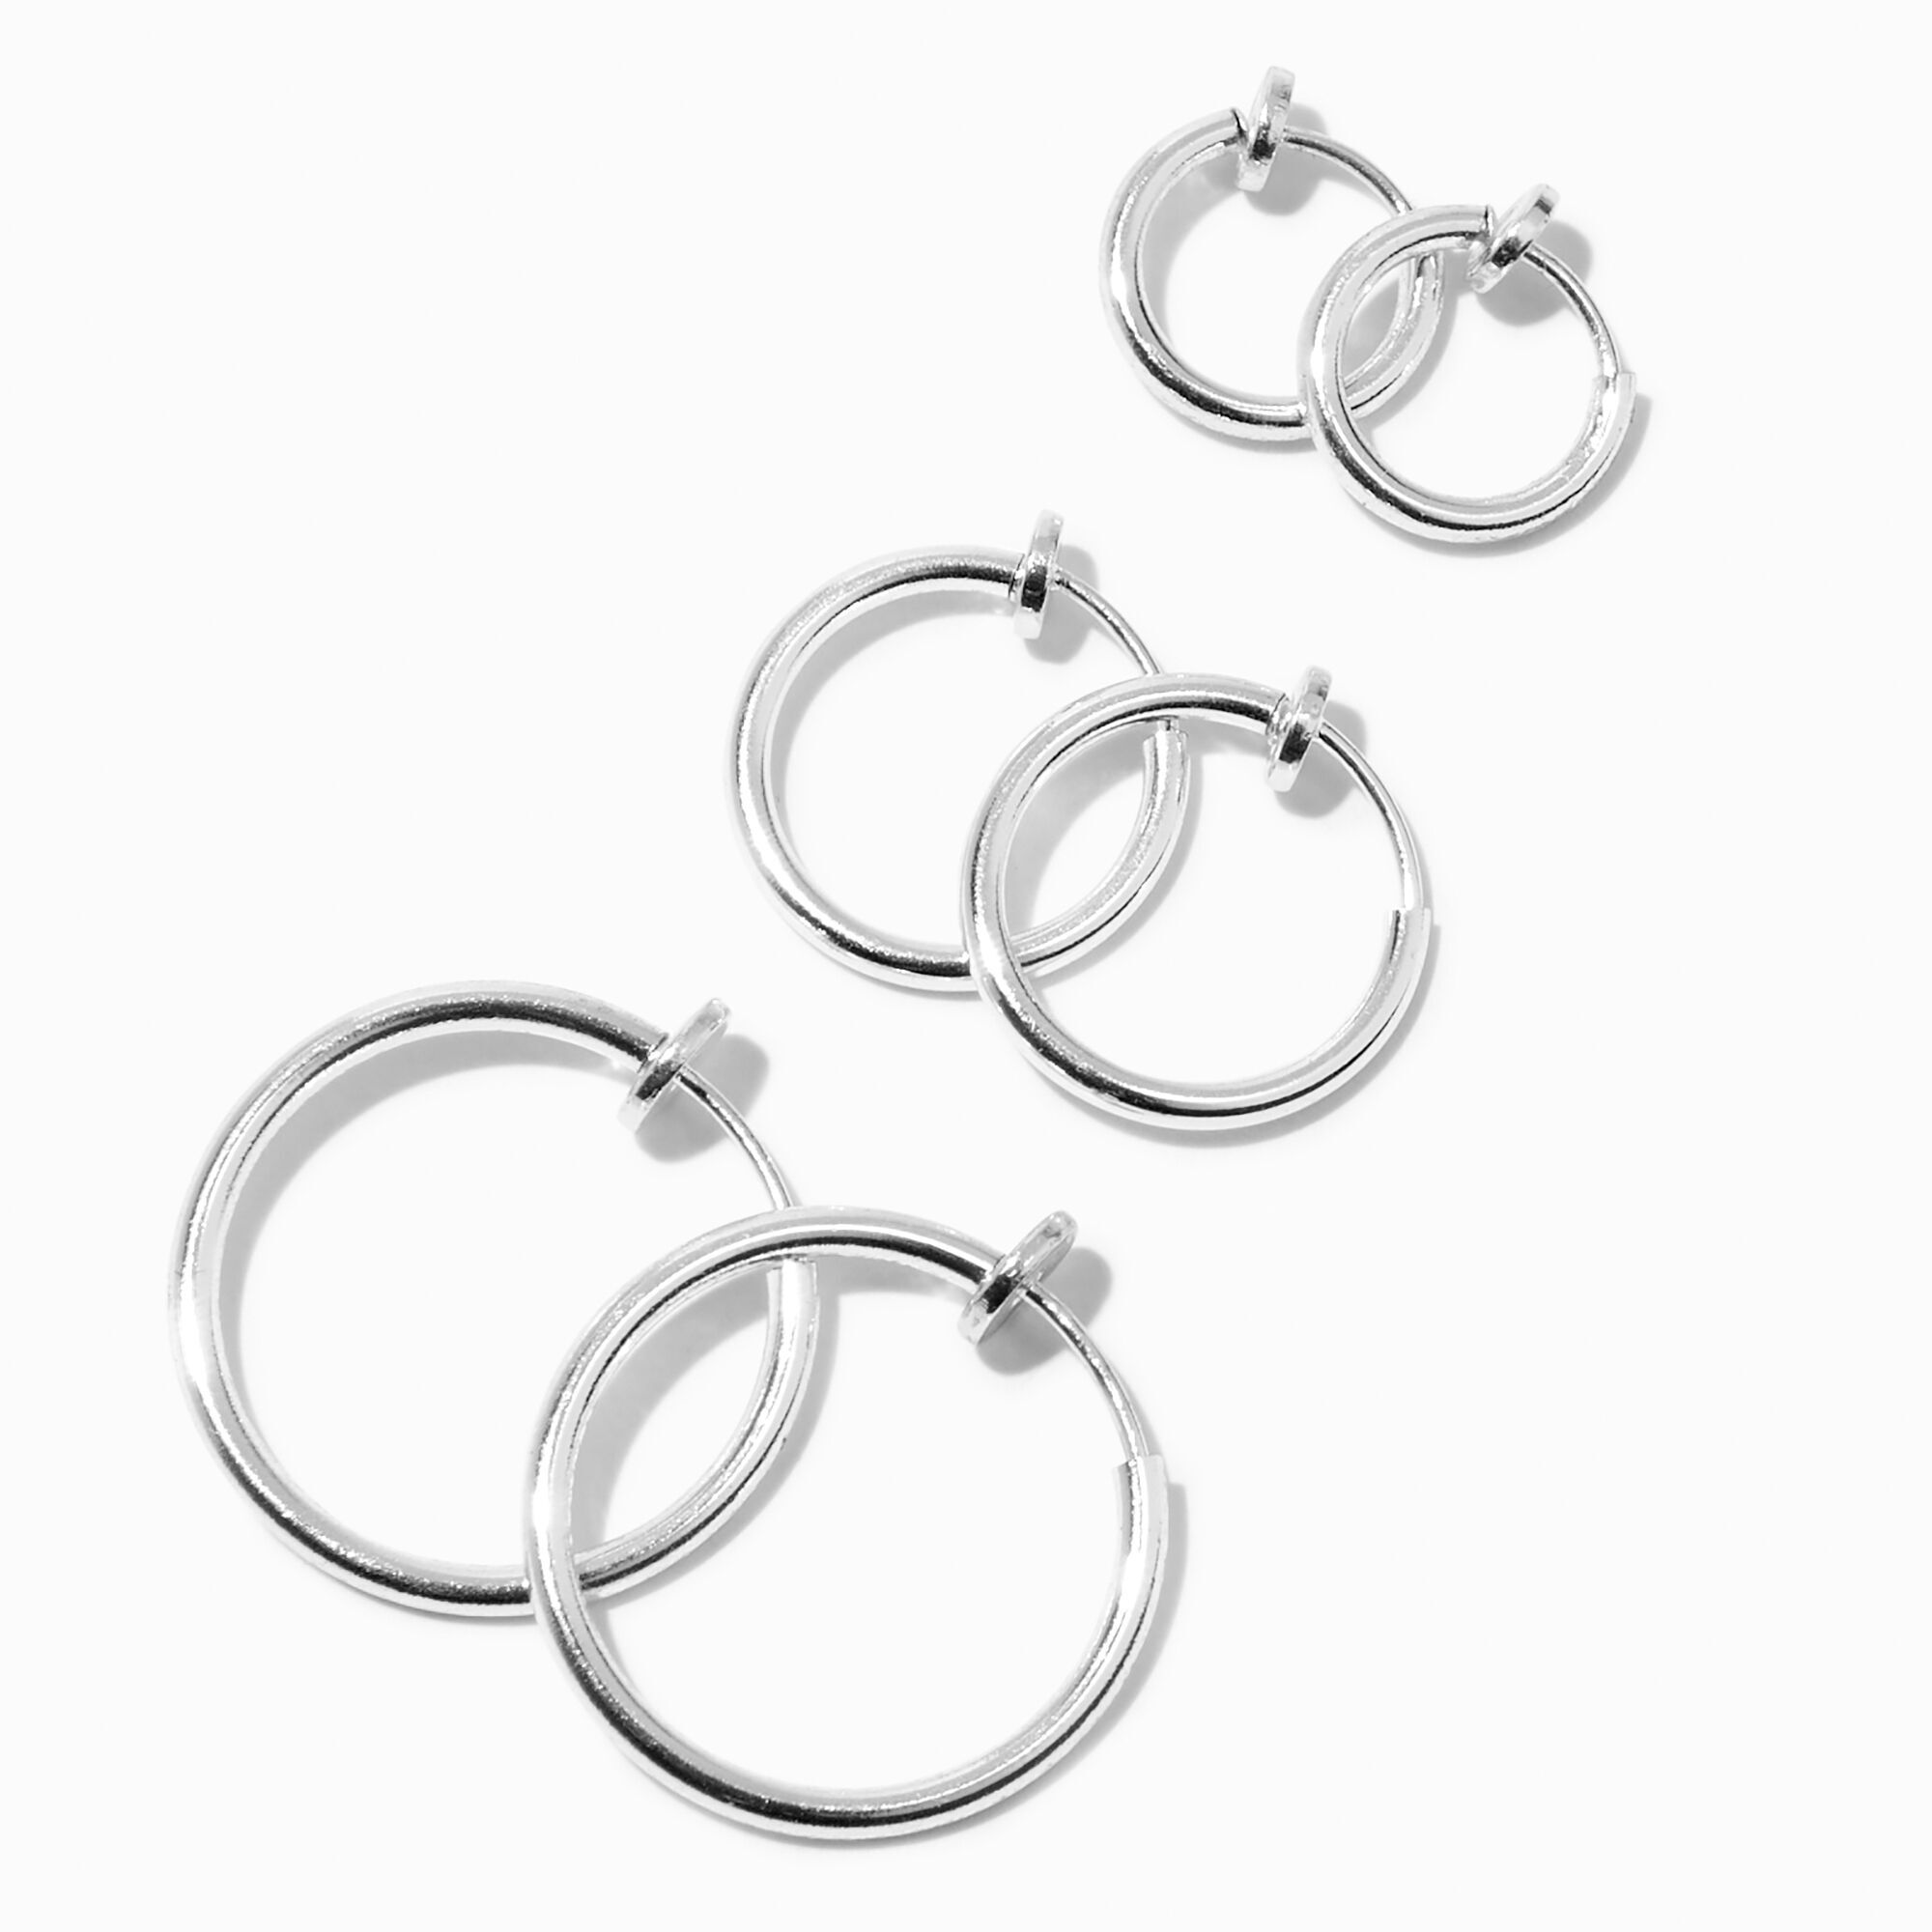 View Claires Graduated Clip On Hoop Earrings 3 Pack Silver information